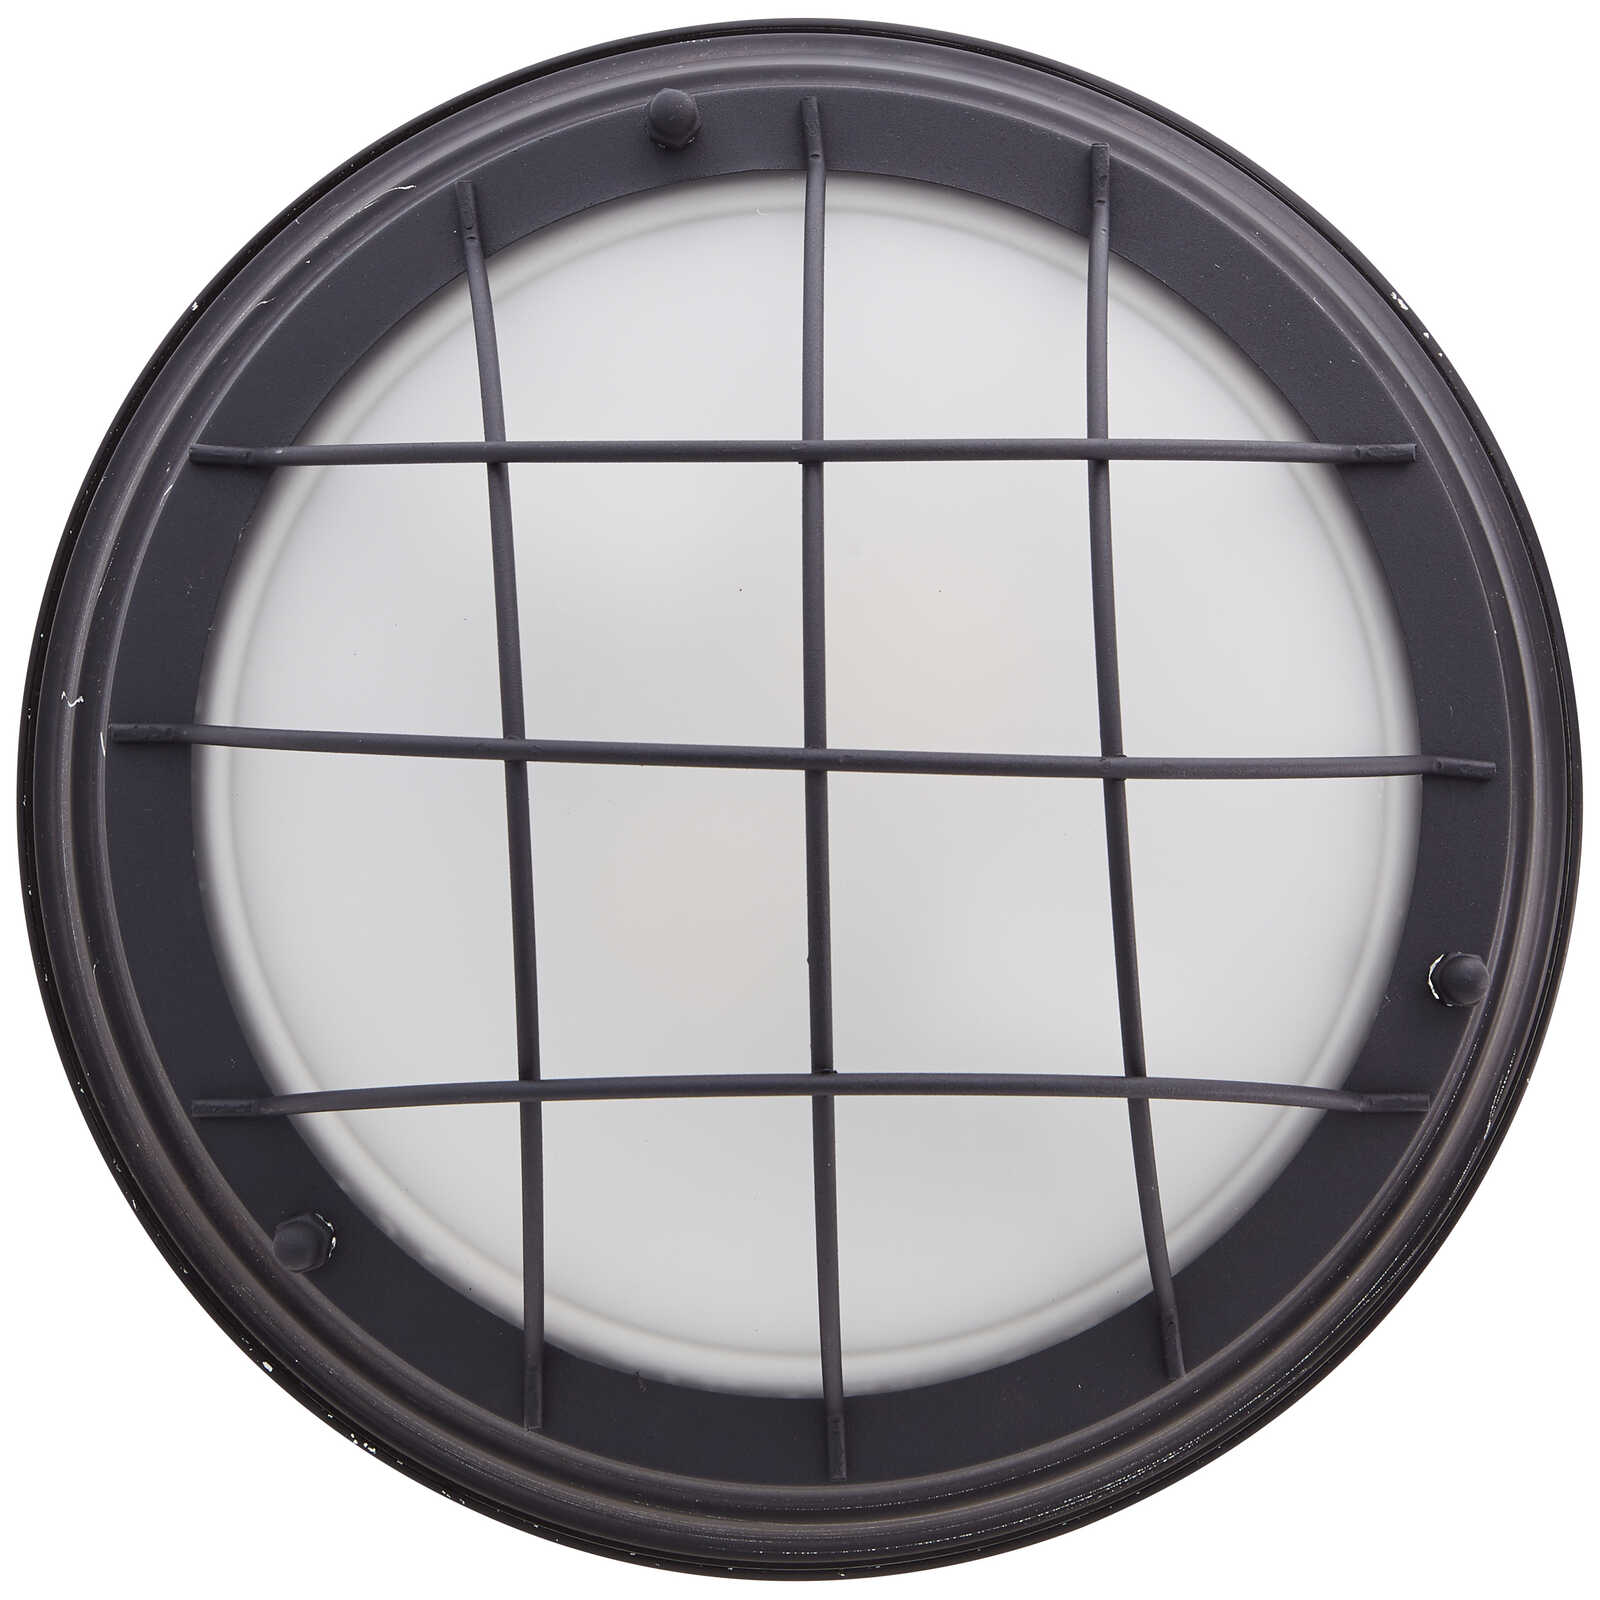             Glass wall and ceiling light - Sina 1 - Black
        